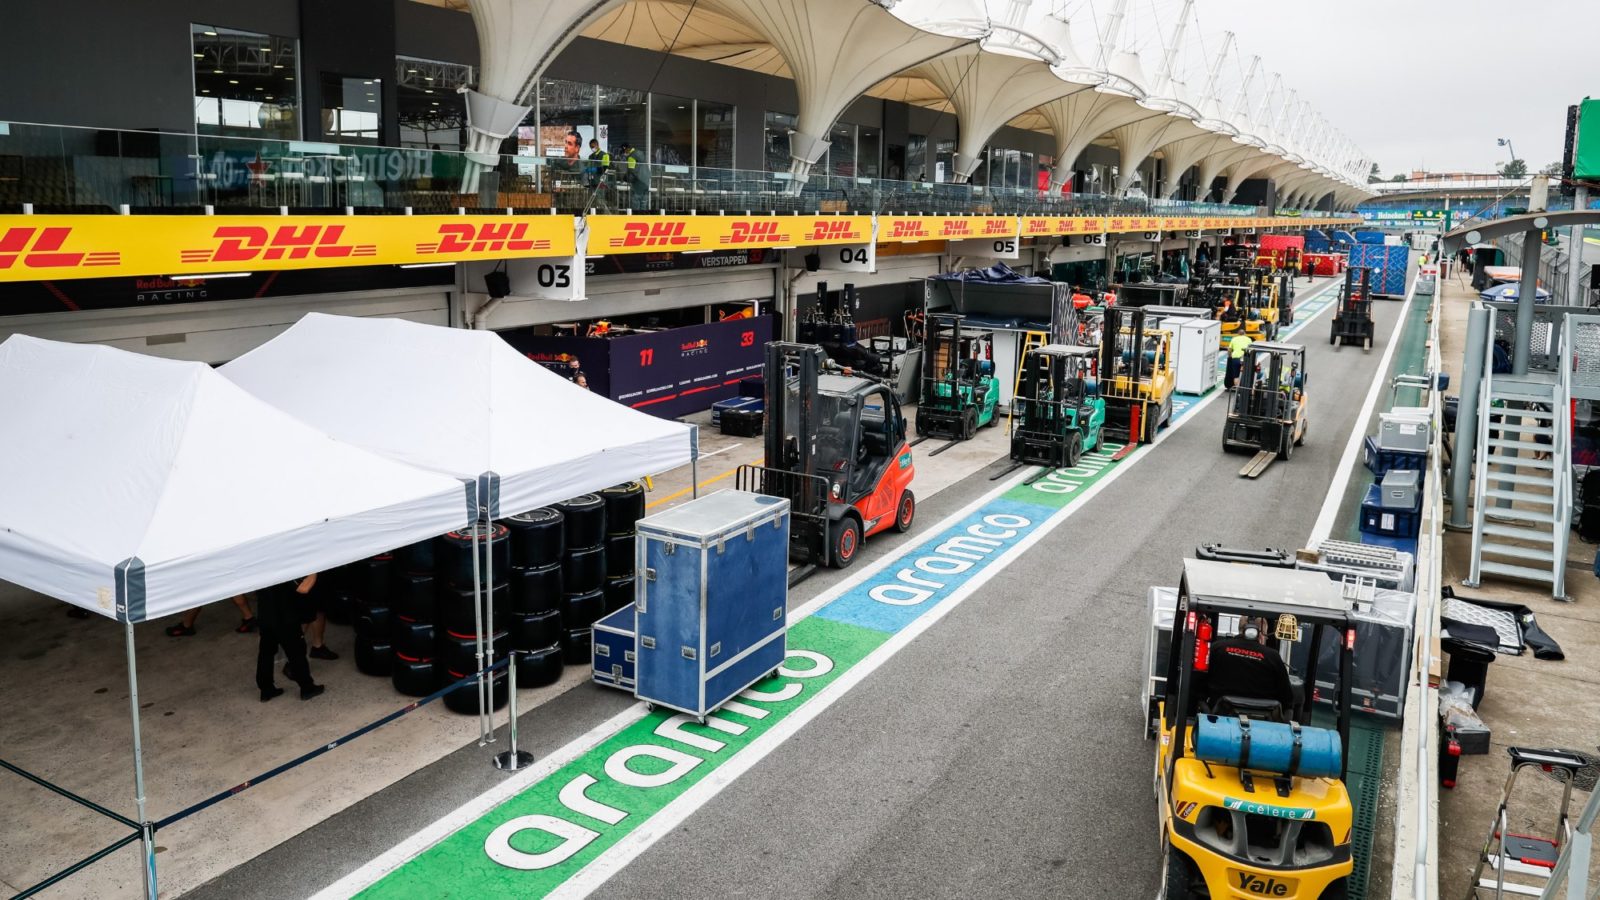 Freight being unpacked at the Bahrain GP circuit